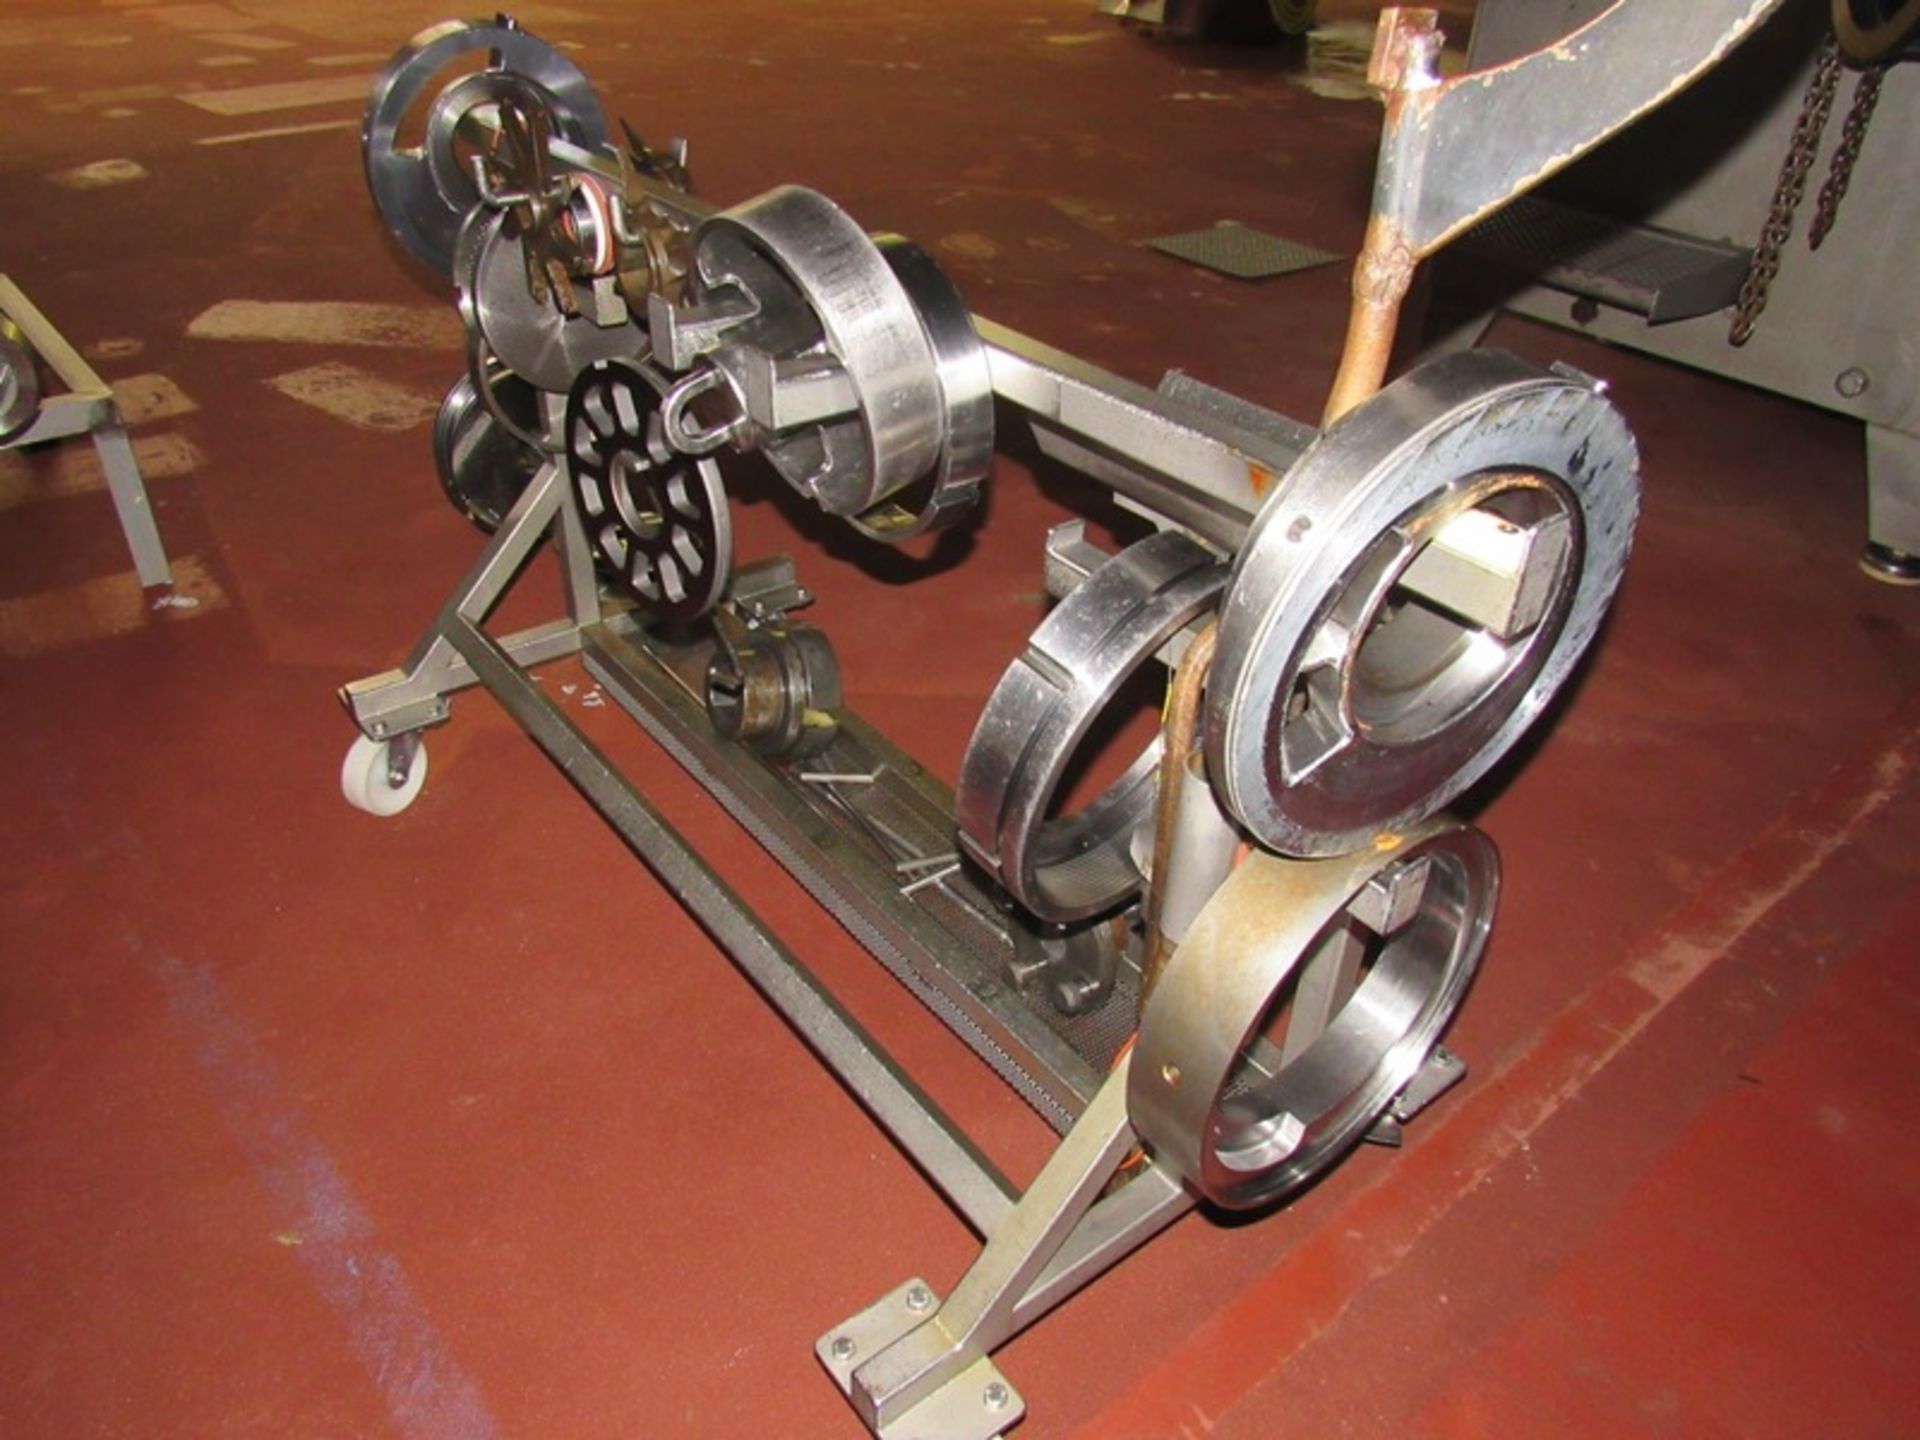 Wolfking Mdl. C-250-UNI Stainless Steel Grinder, Ser. #M-80477, Mfg. 1995, stainless steel auger, - Image 9 of 10